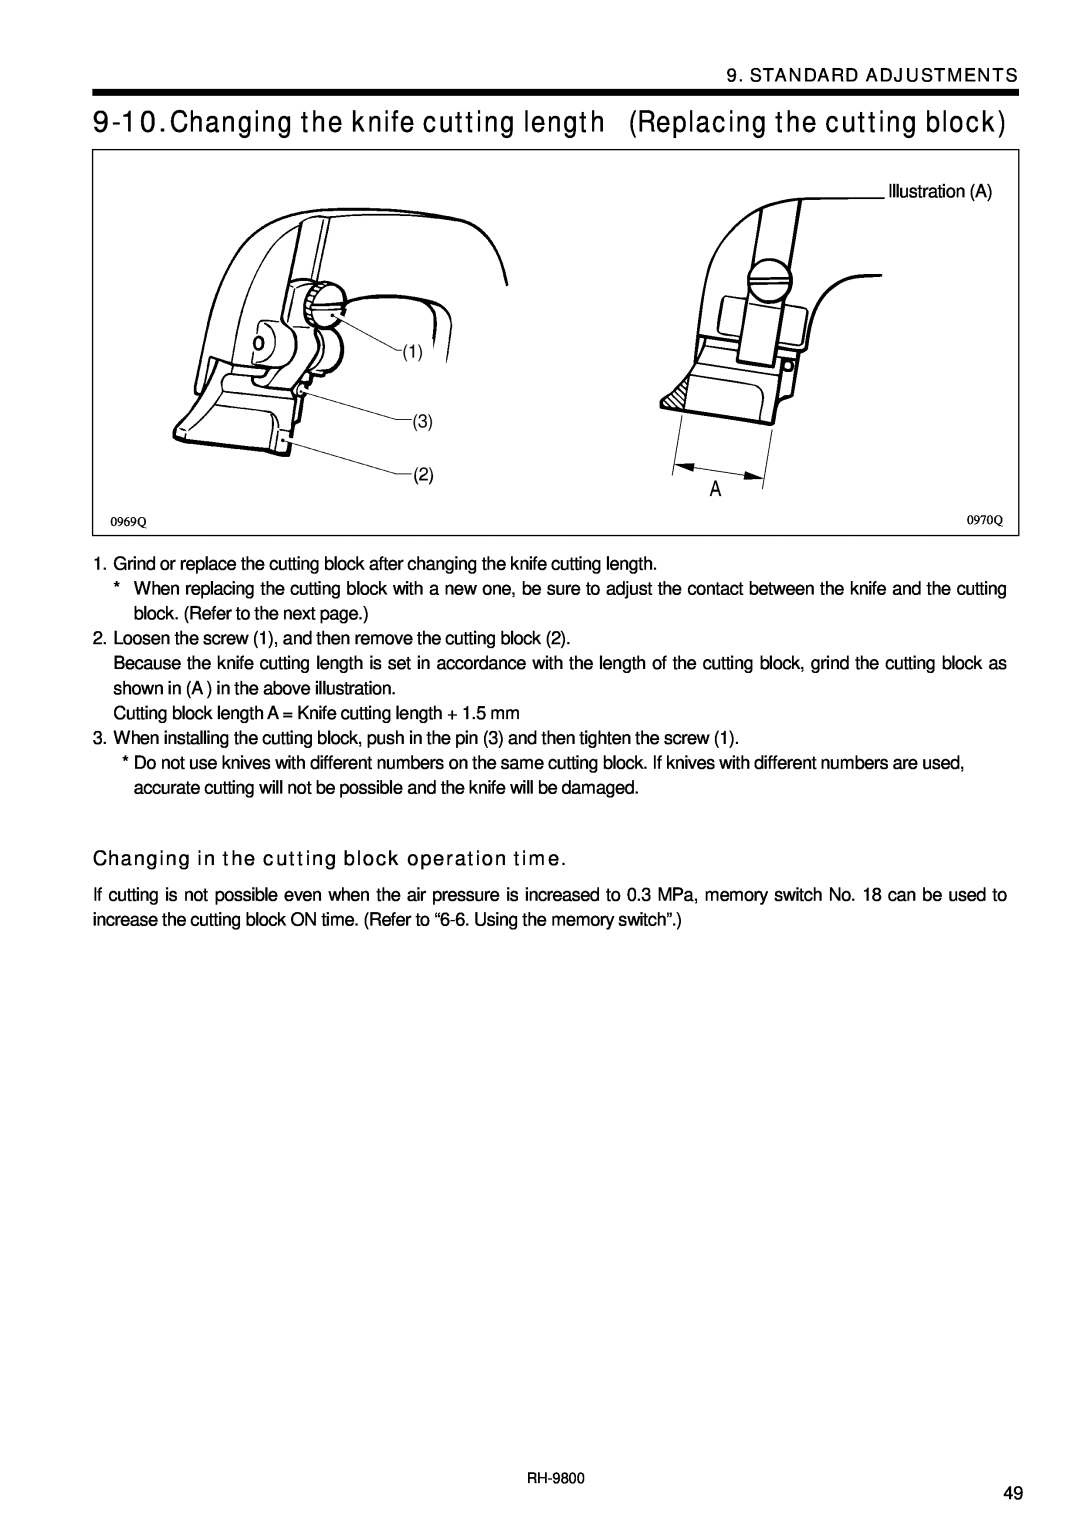 Brother DH4-B980 instruction manual Changing the knife cutting length Replacing the cutting block, Standard Adjustments 